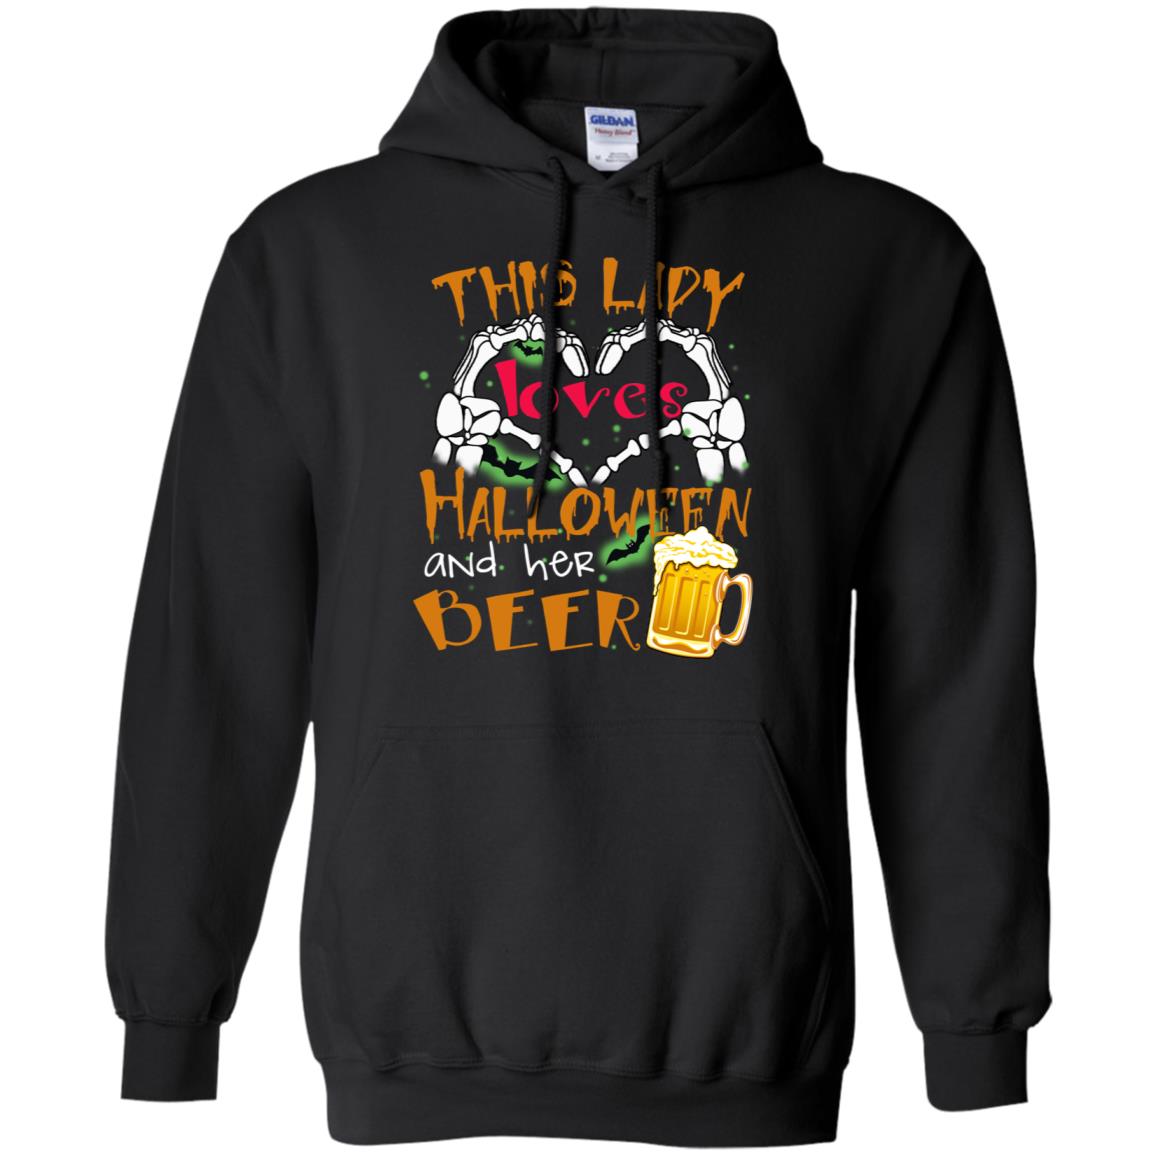 This Girl Loves Halloween And Her Beer Funny Halloween Shirt For Beer LoversG185 Gildan Pullover Hoodie 8 oz.